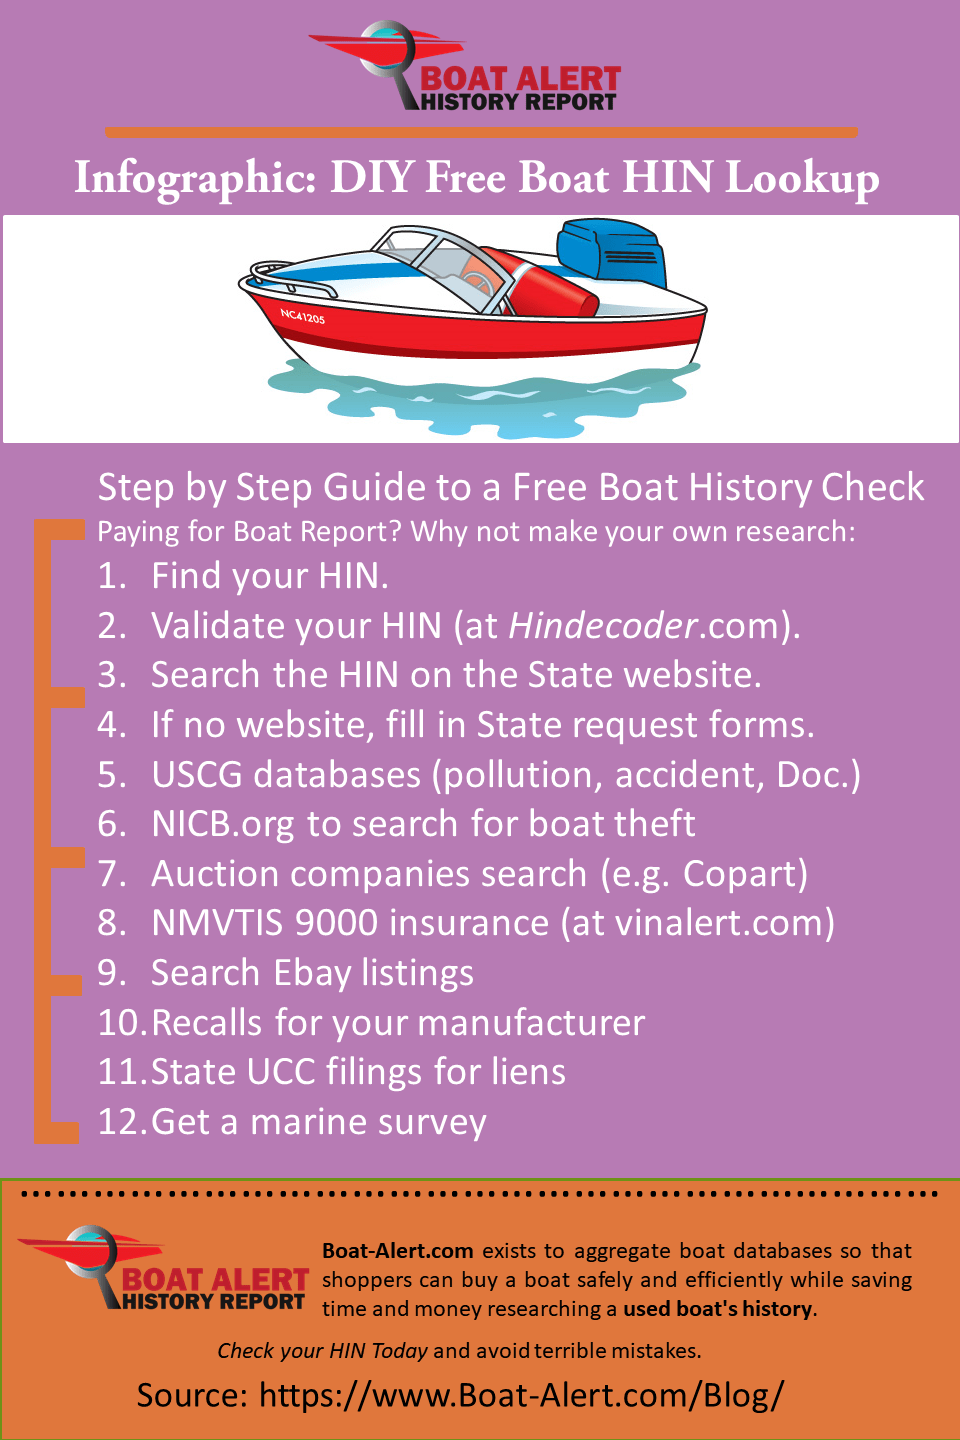 Infographic: DIY Free Boat History Check
